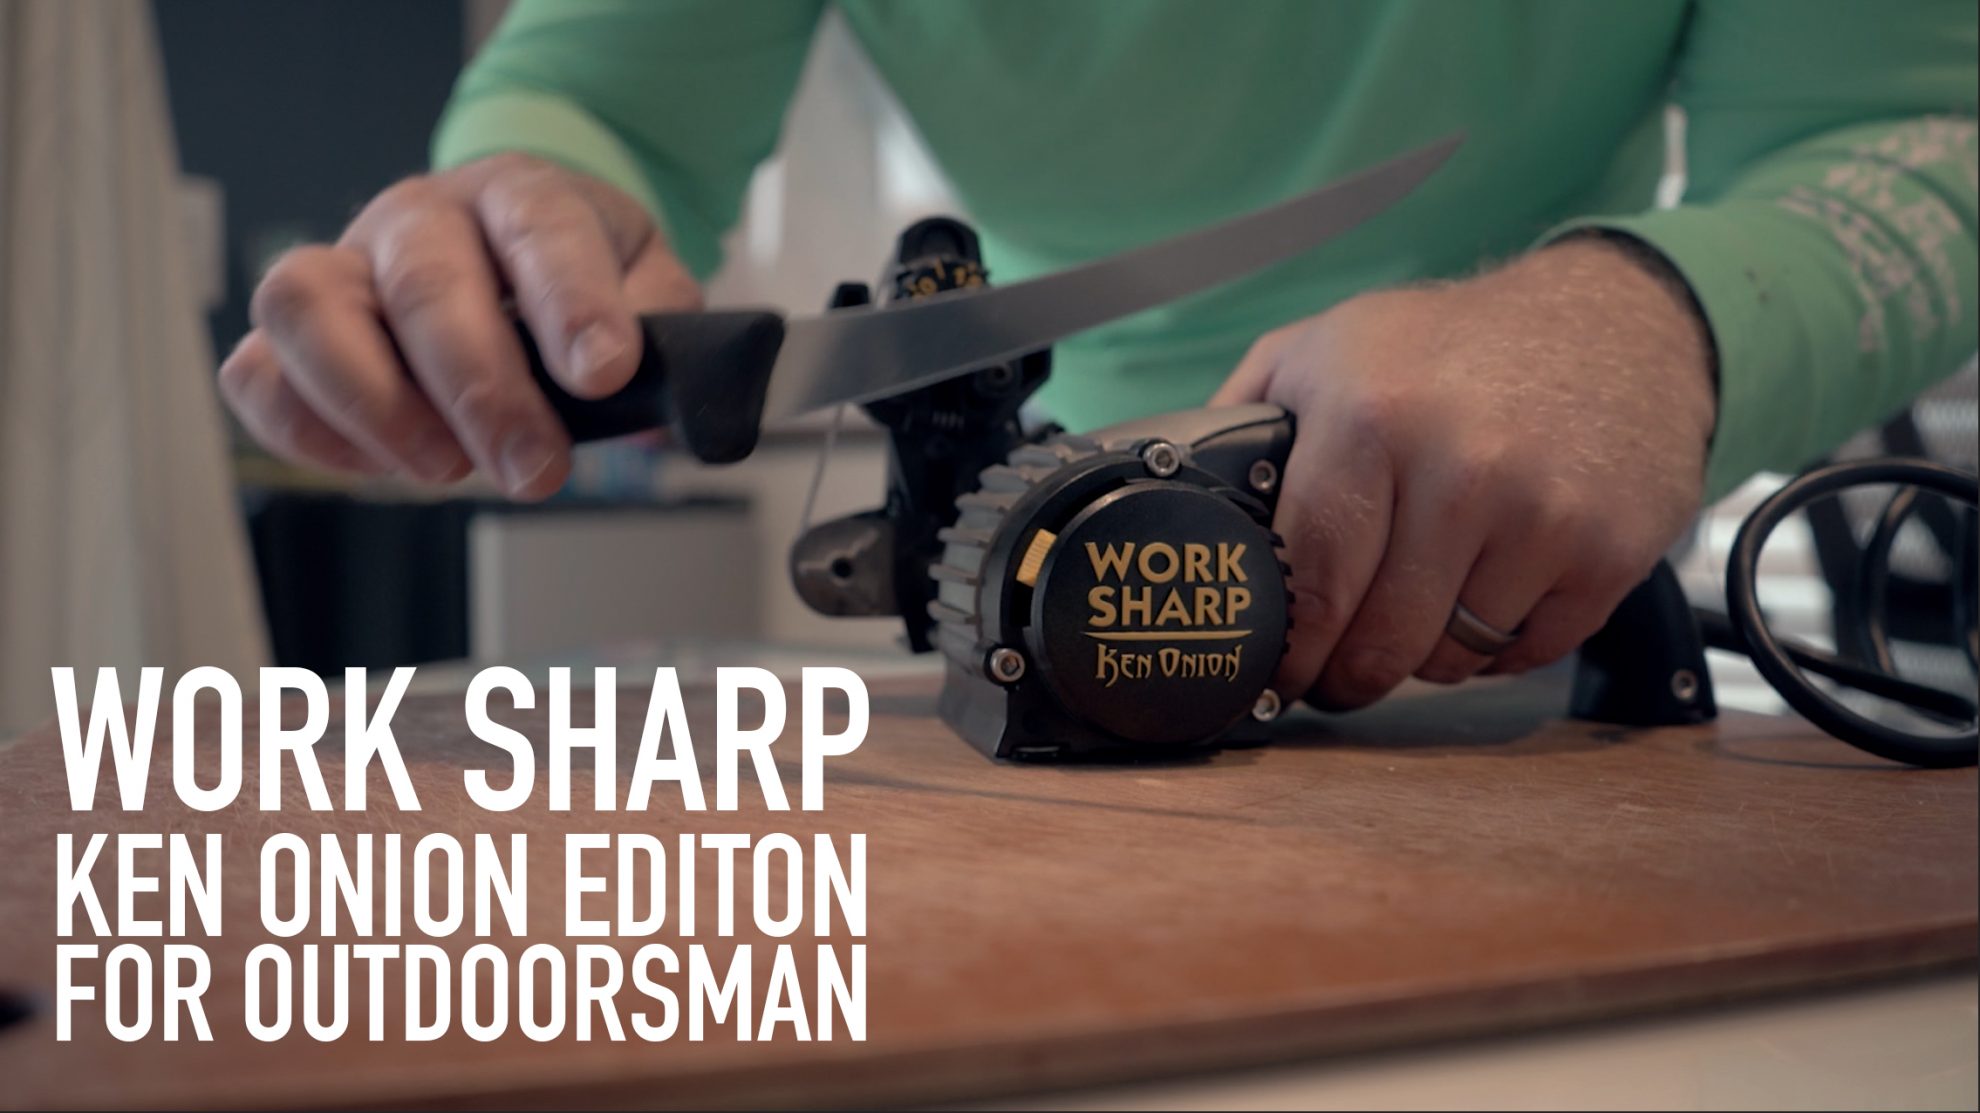 Review of the Work Sharp Ken Onion Edition Knife and Tool Sharpener